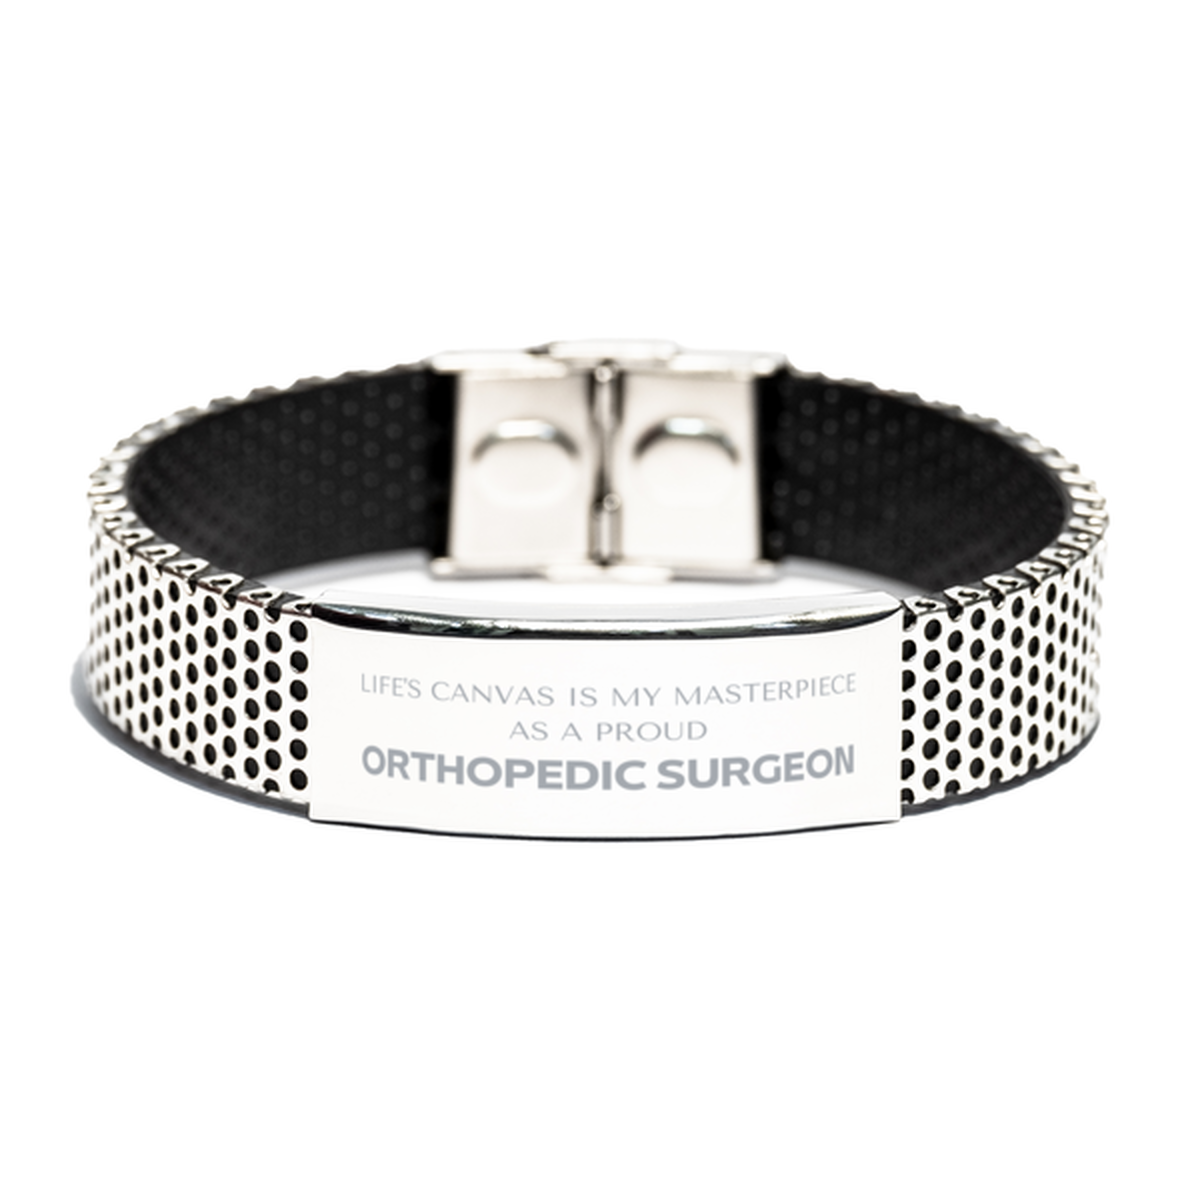 Proud Orthopedic Surgeon Gifts, Life's canvas is my masterpiece, Epic Birthday Christmas Unique Stainless Steel Bracelet For Orthopedic Surgeon, Coworkers, Men, Women, Friends